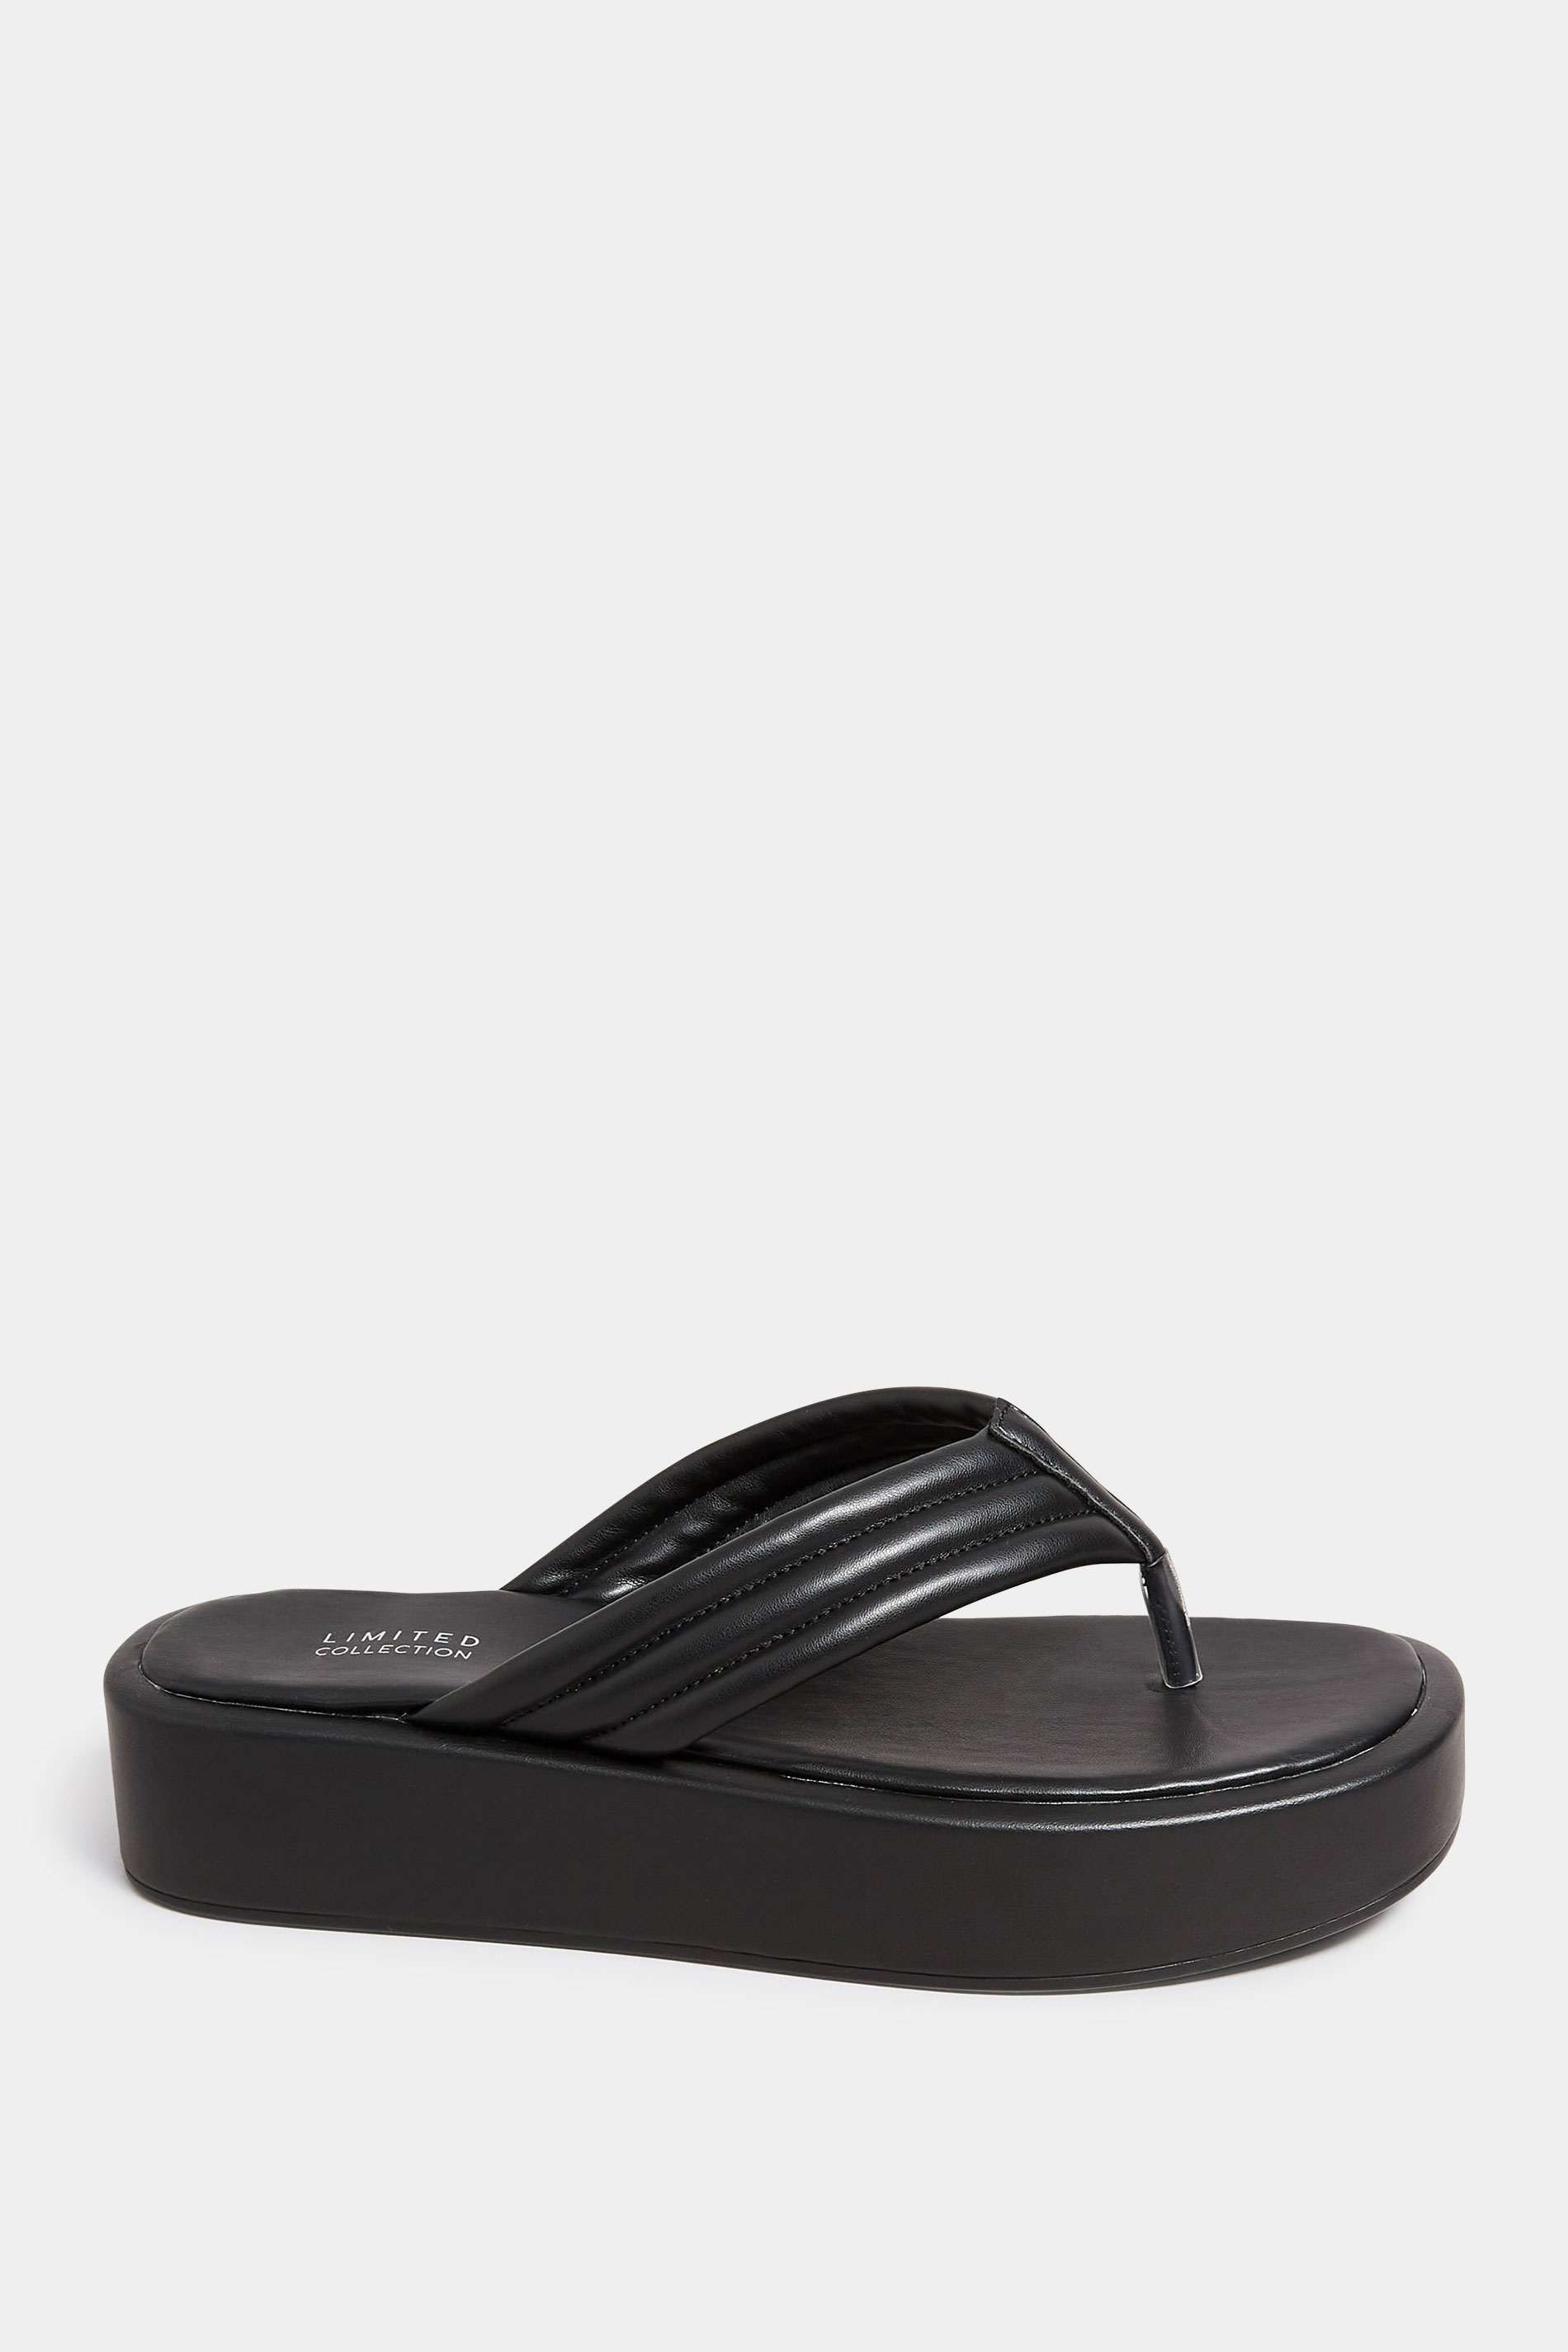 LIMITED COLLECTION Black Flatform Flip Flops In Wide E Fit | Yours Clothing 3